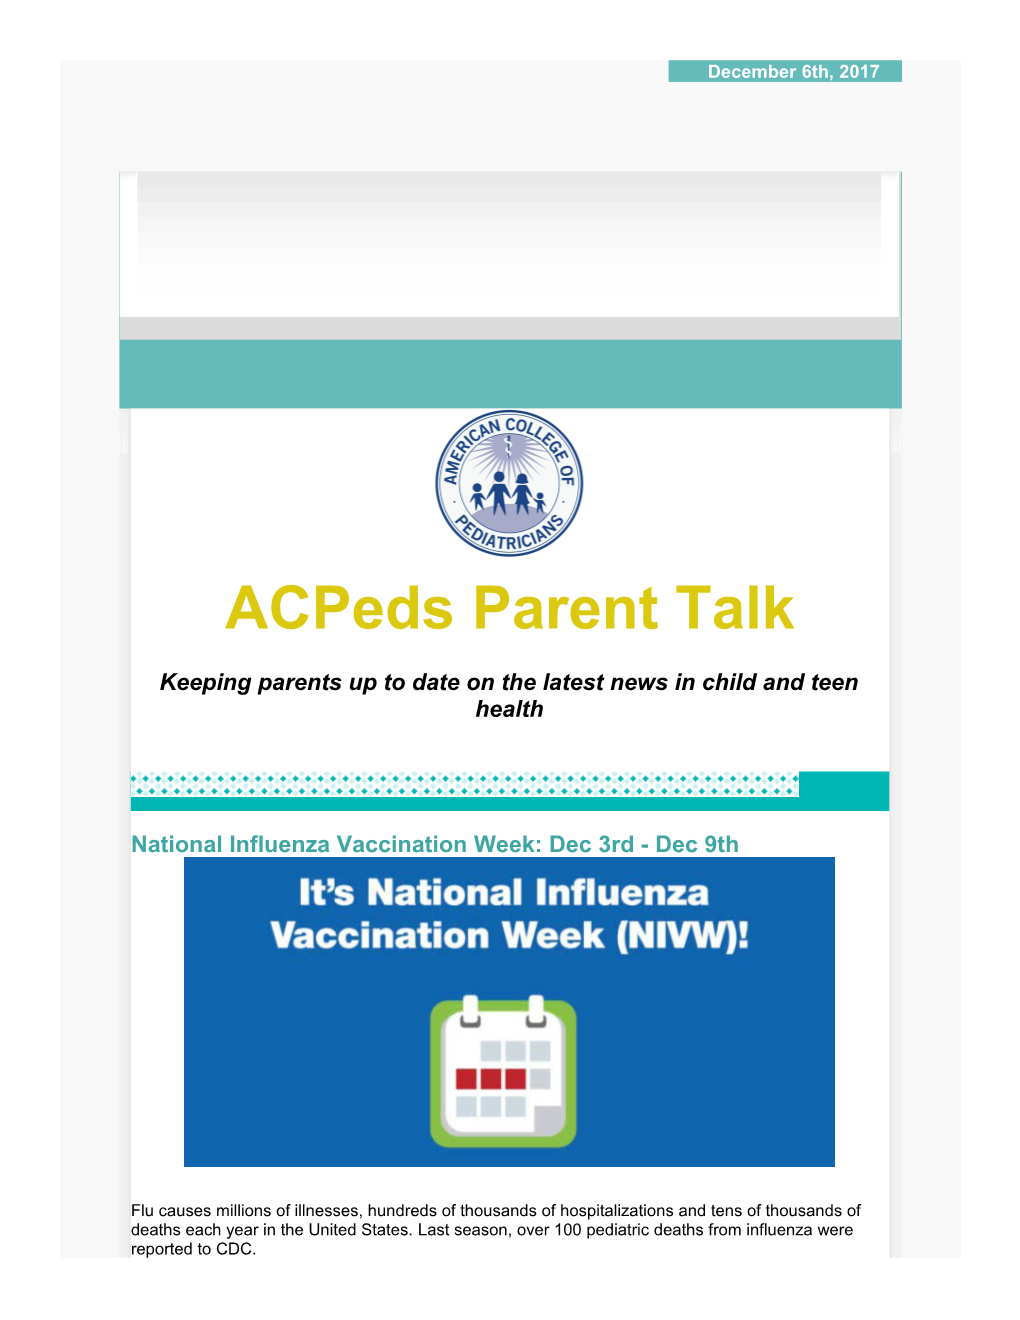 2017 Update on Influenza Disease and Vaccine(5) - from Acpeds Member Dr. Scott Field